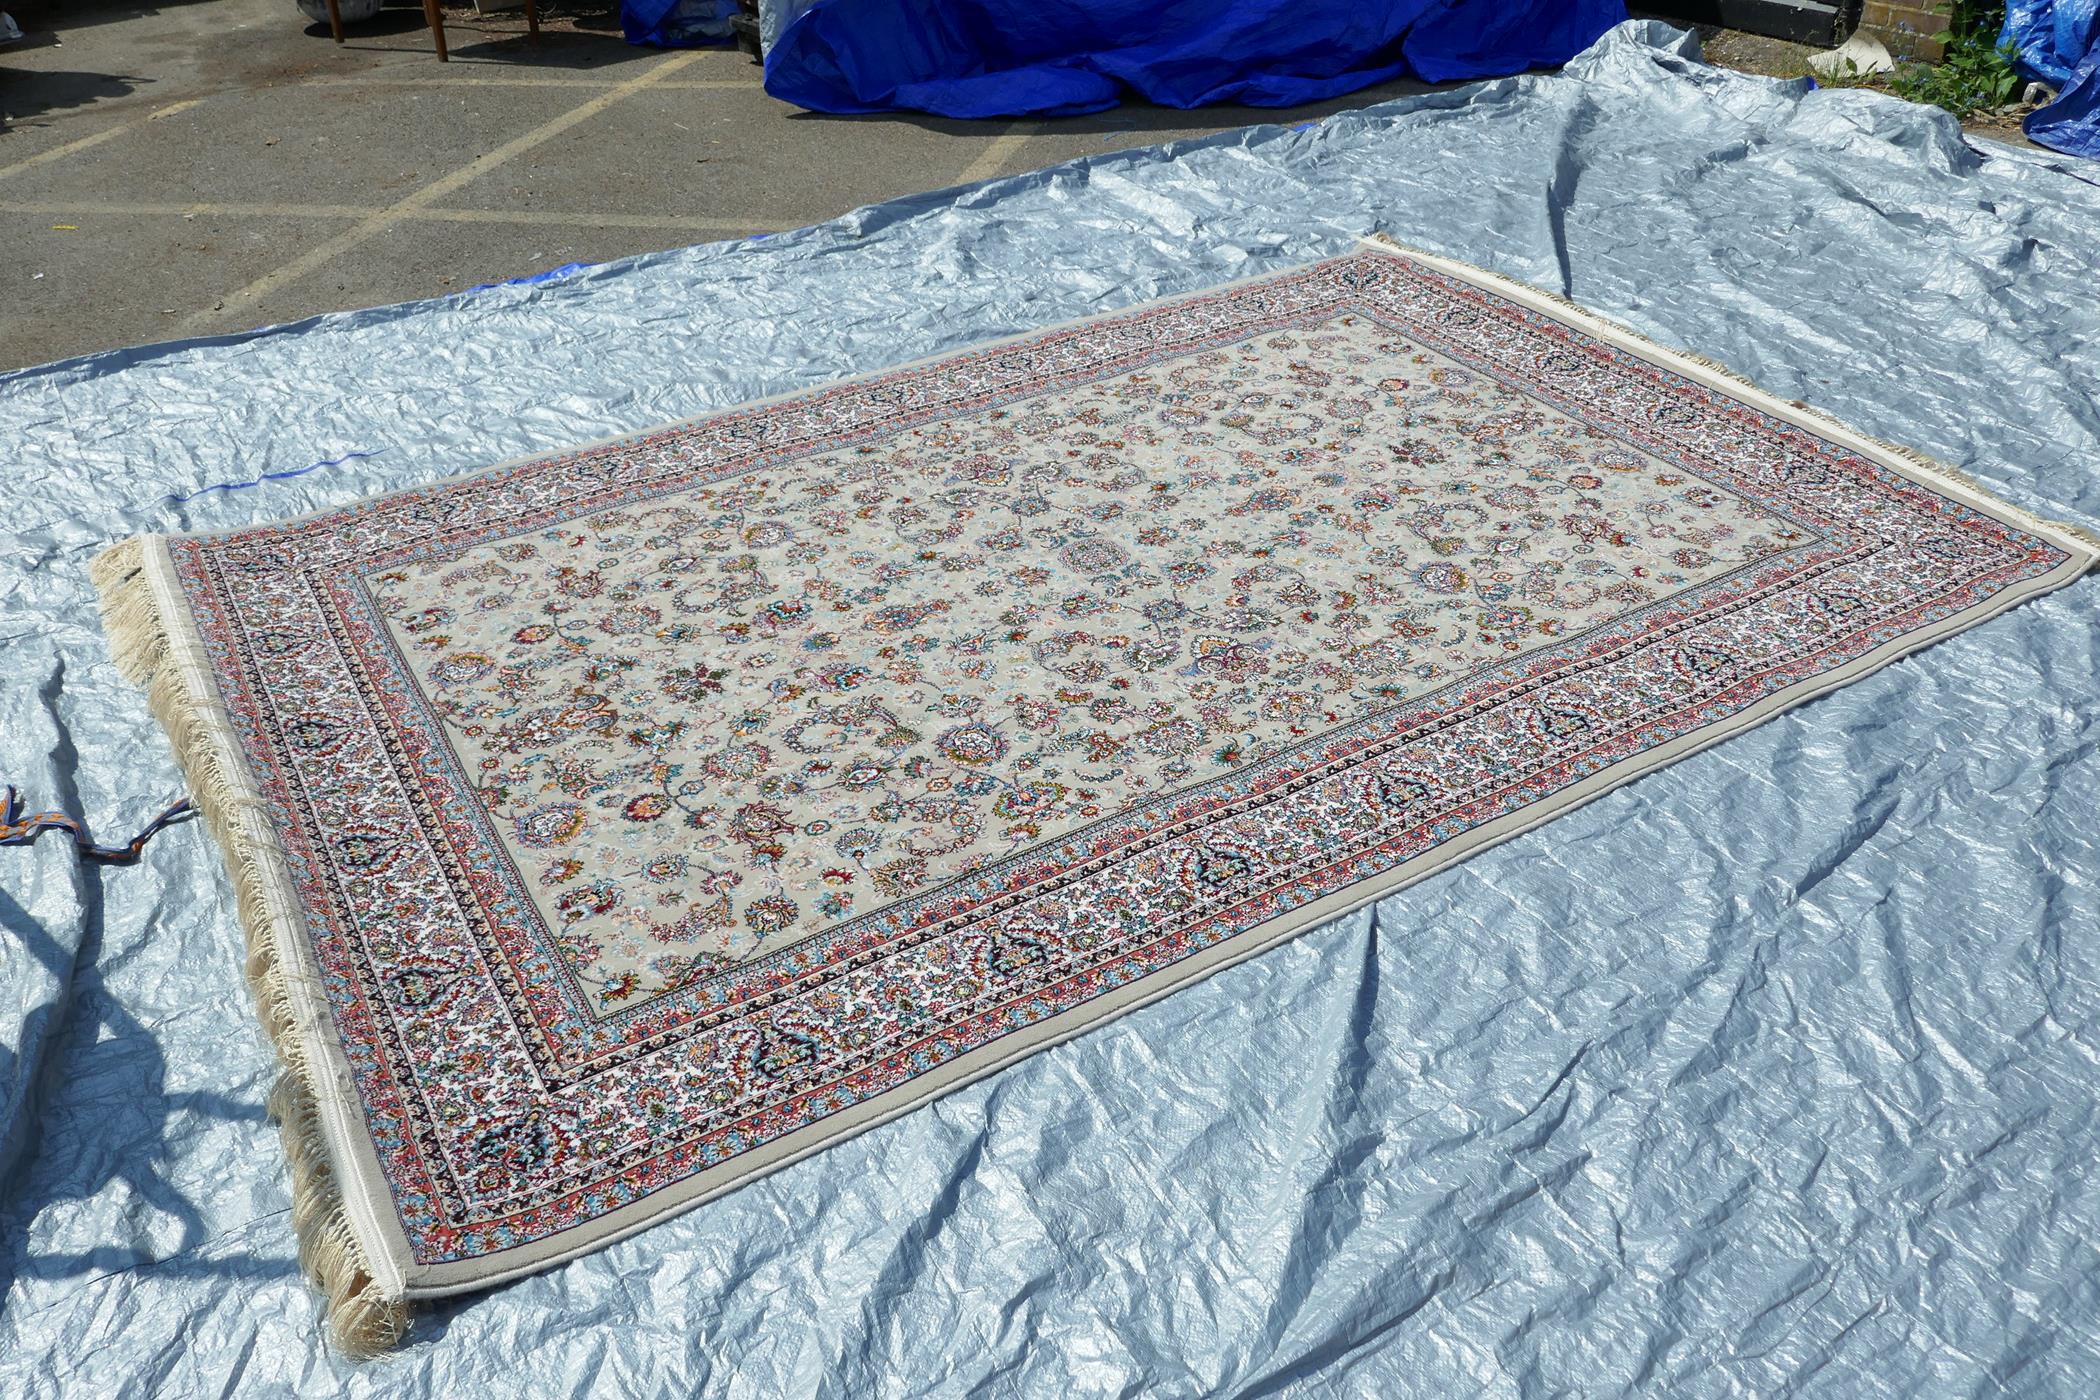 A fine woven beige ground full pile Iranian carpet with an all over floral pattern, 118" x 78" - Image 3 of 5